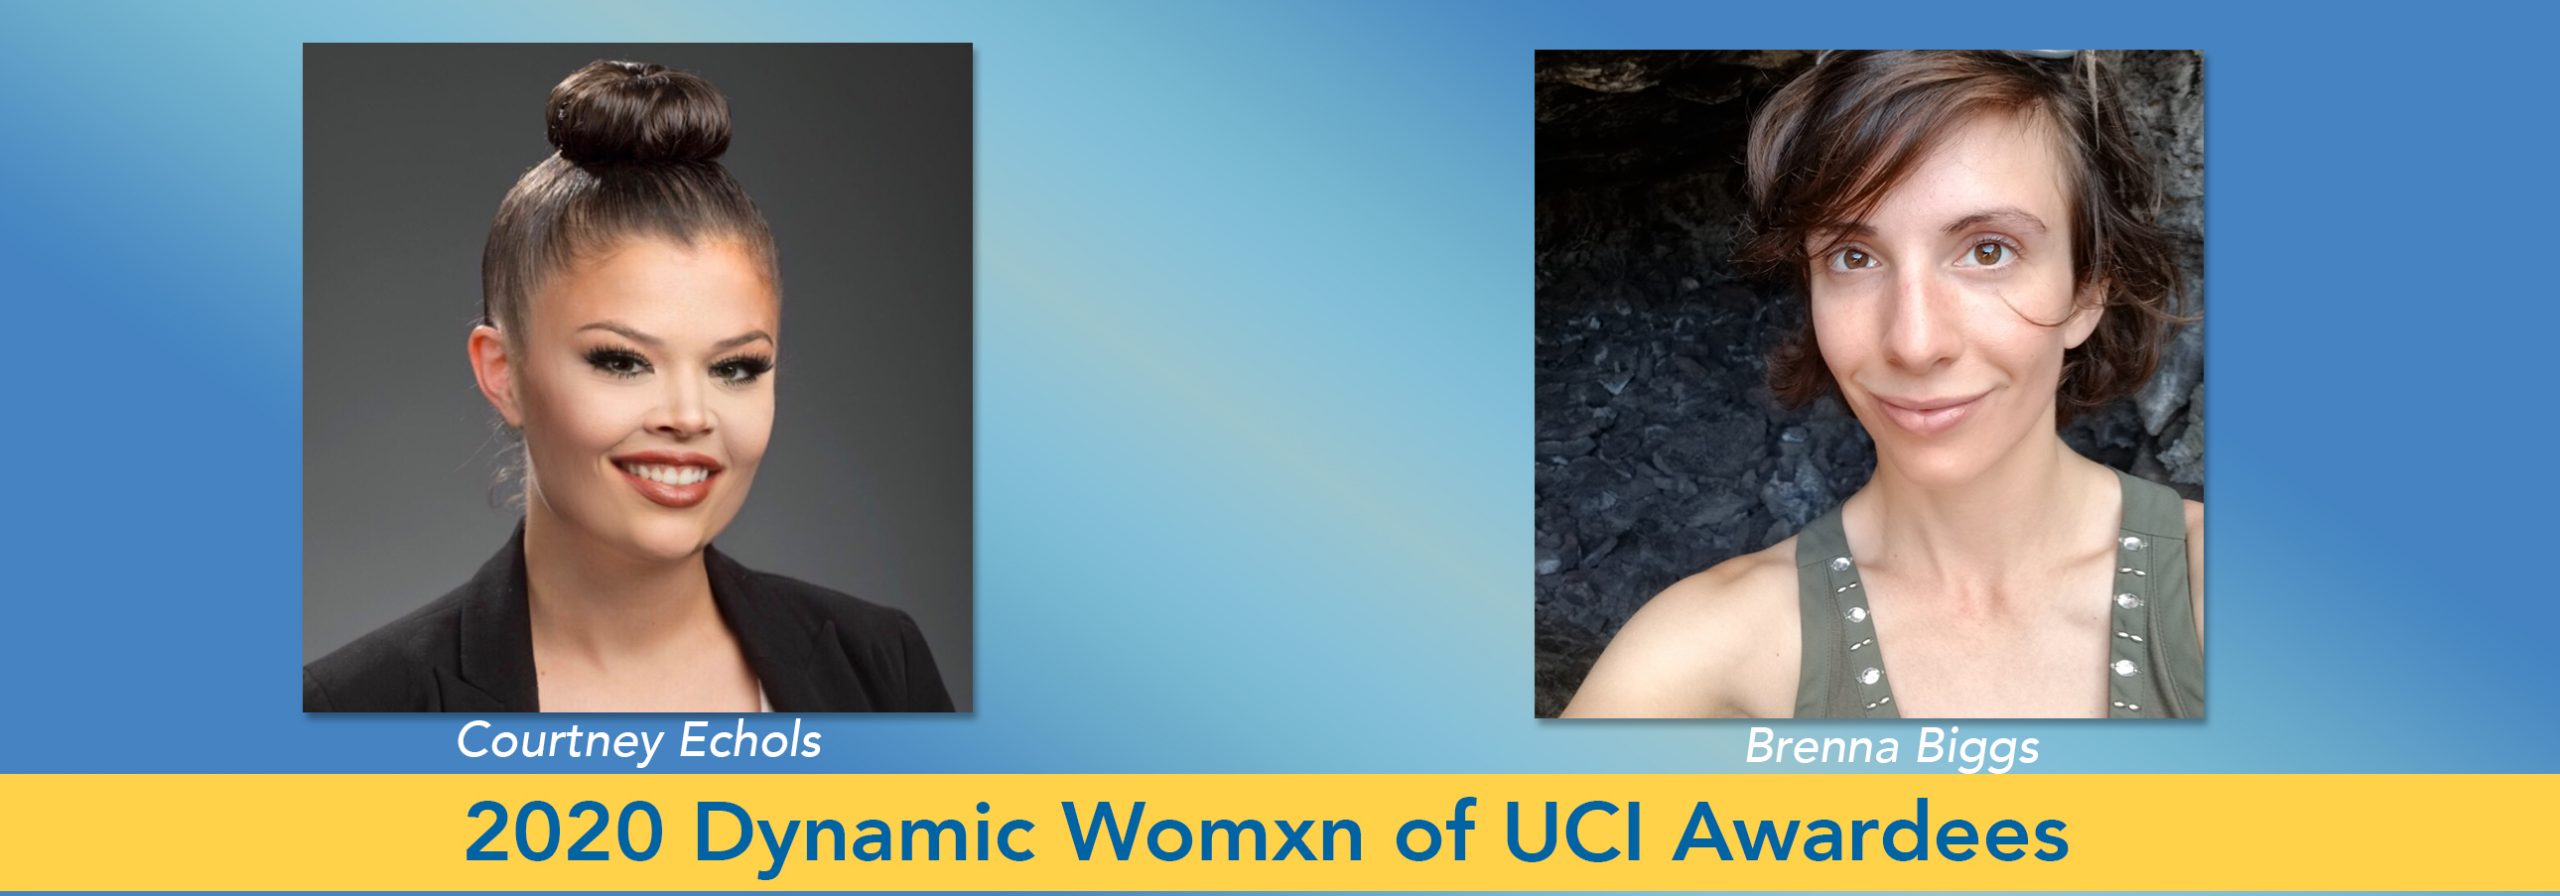 Two 2020 Dynamic Womxn of UCI Awardees - Courtney Echols and Brenna Biggs